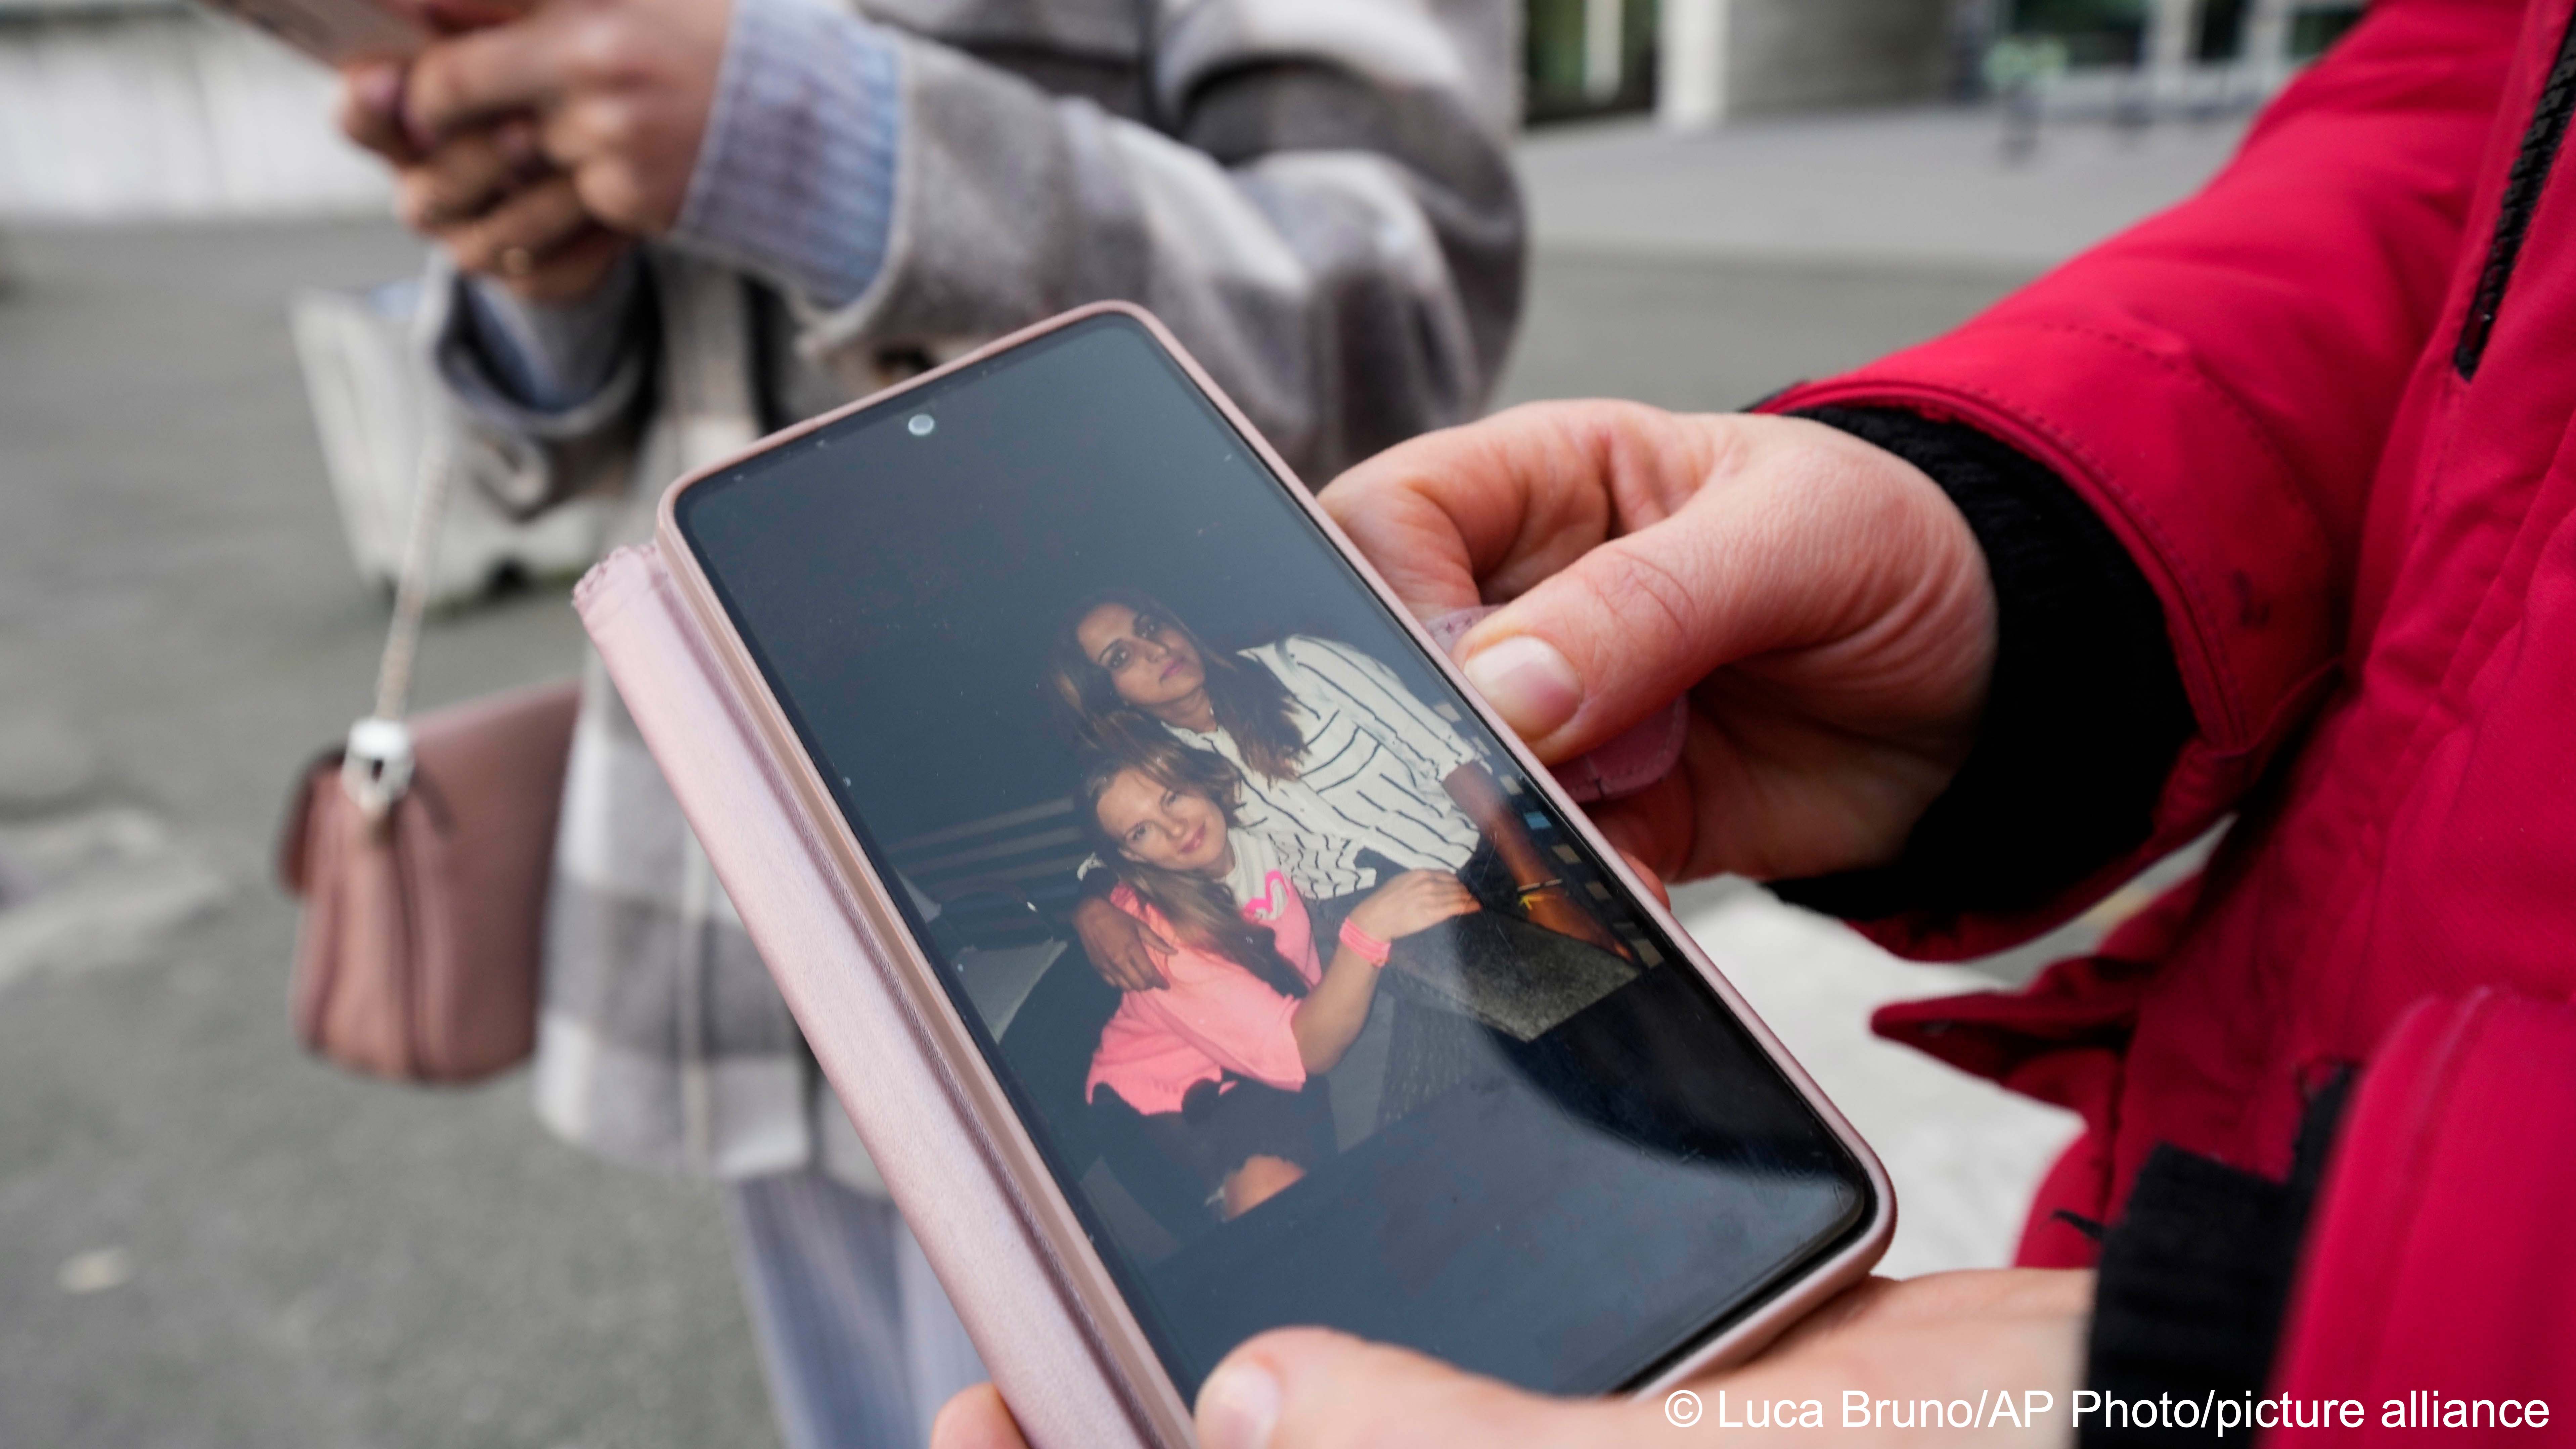 Verkalets Olha from Ukraine, shows her smartphone with pictures of her Pakistani-born friend Sana Cheema outside the law court in Brescia, northern Italy, 9 February 2023, after testifying in a hearing of the trial for her murder (image: Luca Bruno/AP Photo/picture alliance)